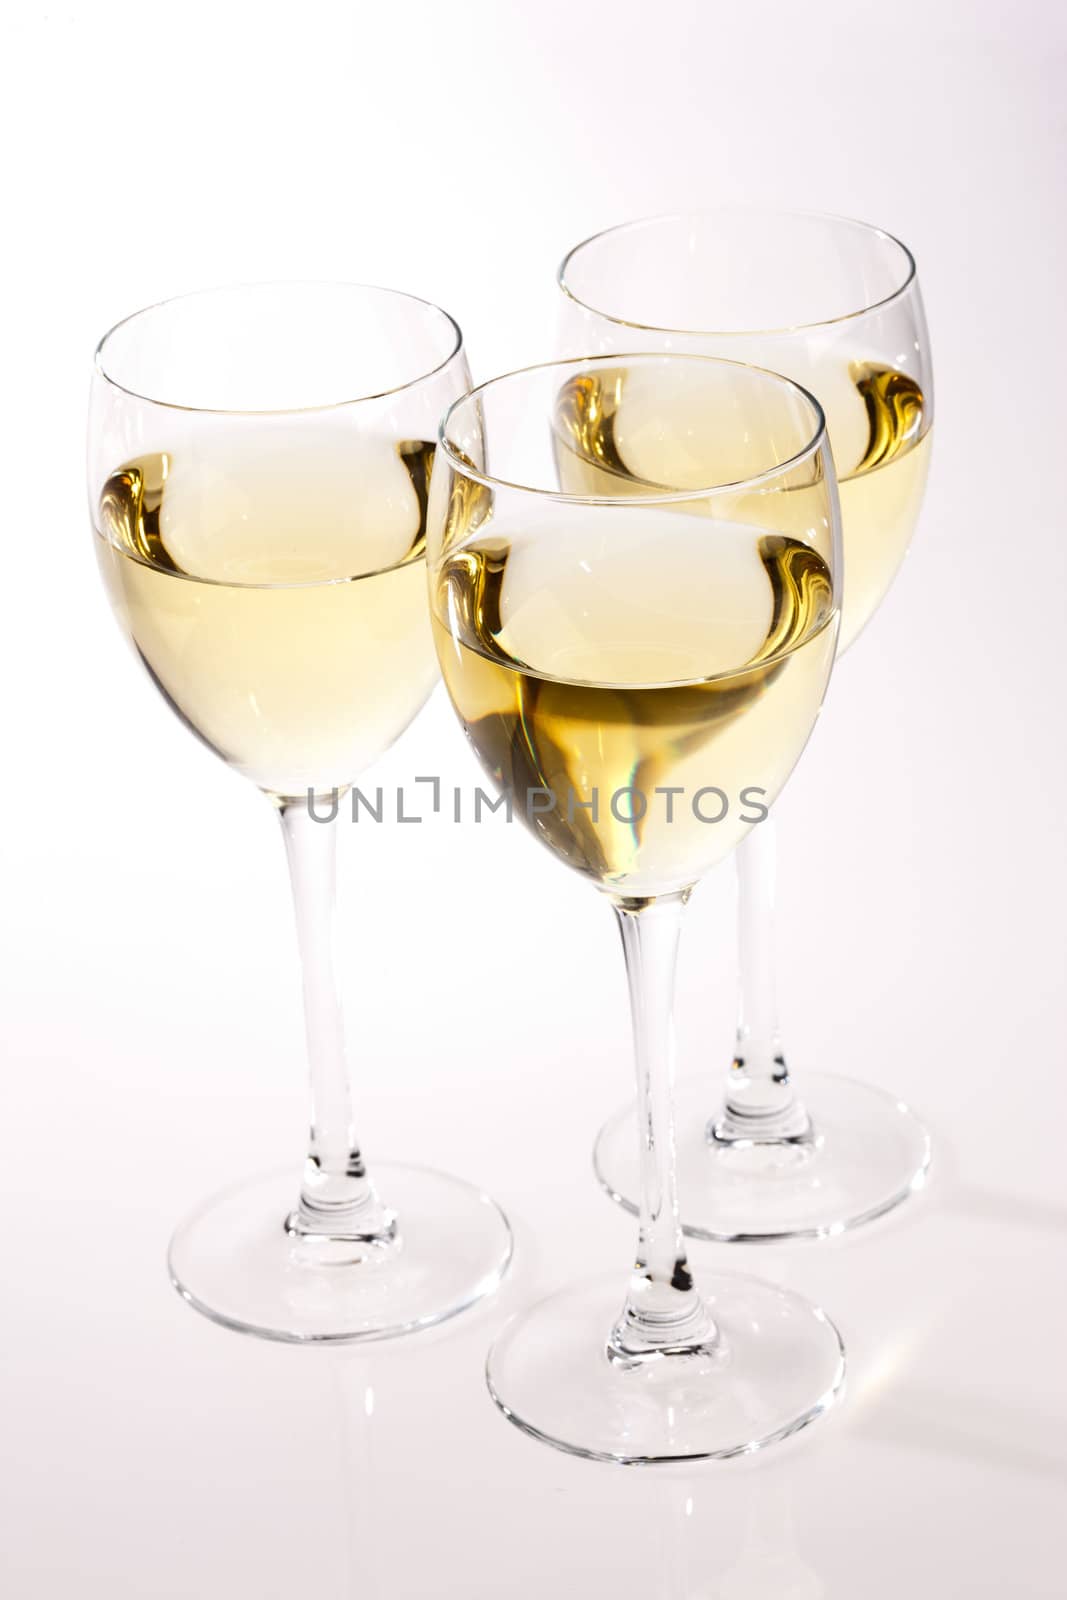 three glasses with white wine over light bsckground